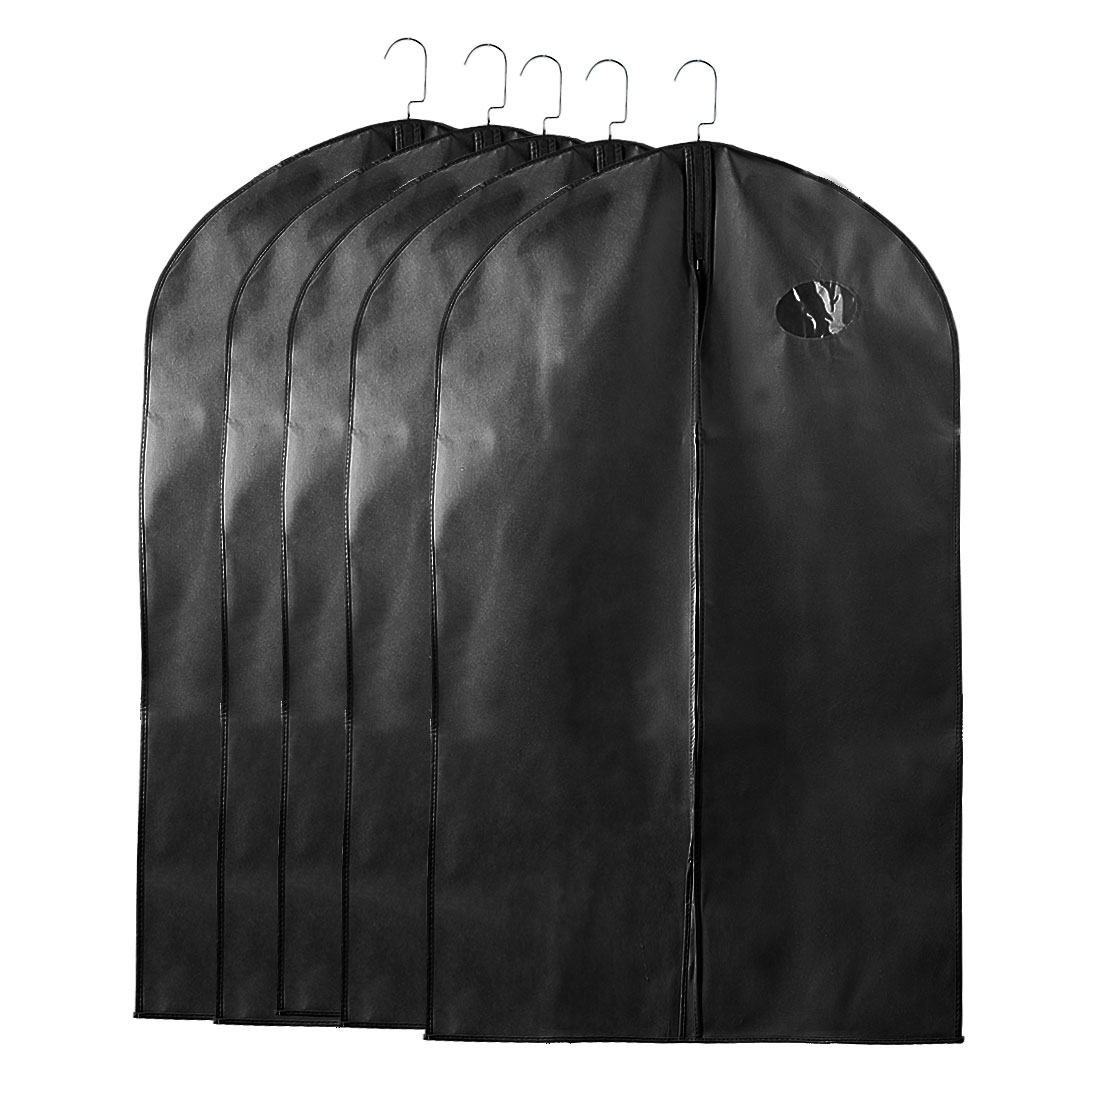 L-Pack Breathable Garment Bag for Suit and Dress 60in Black Garment Cover for Travel and Storage